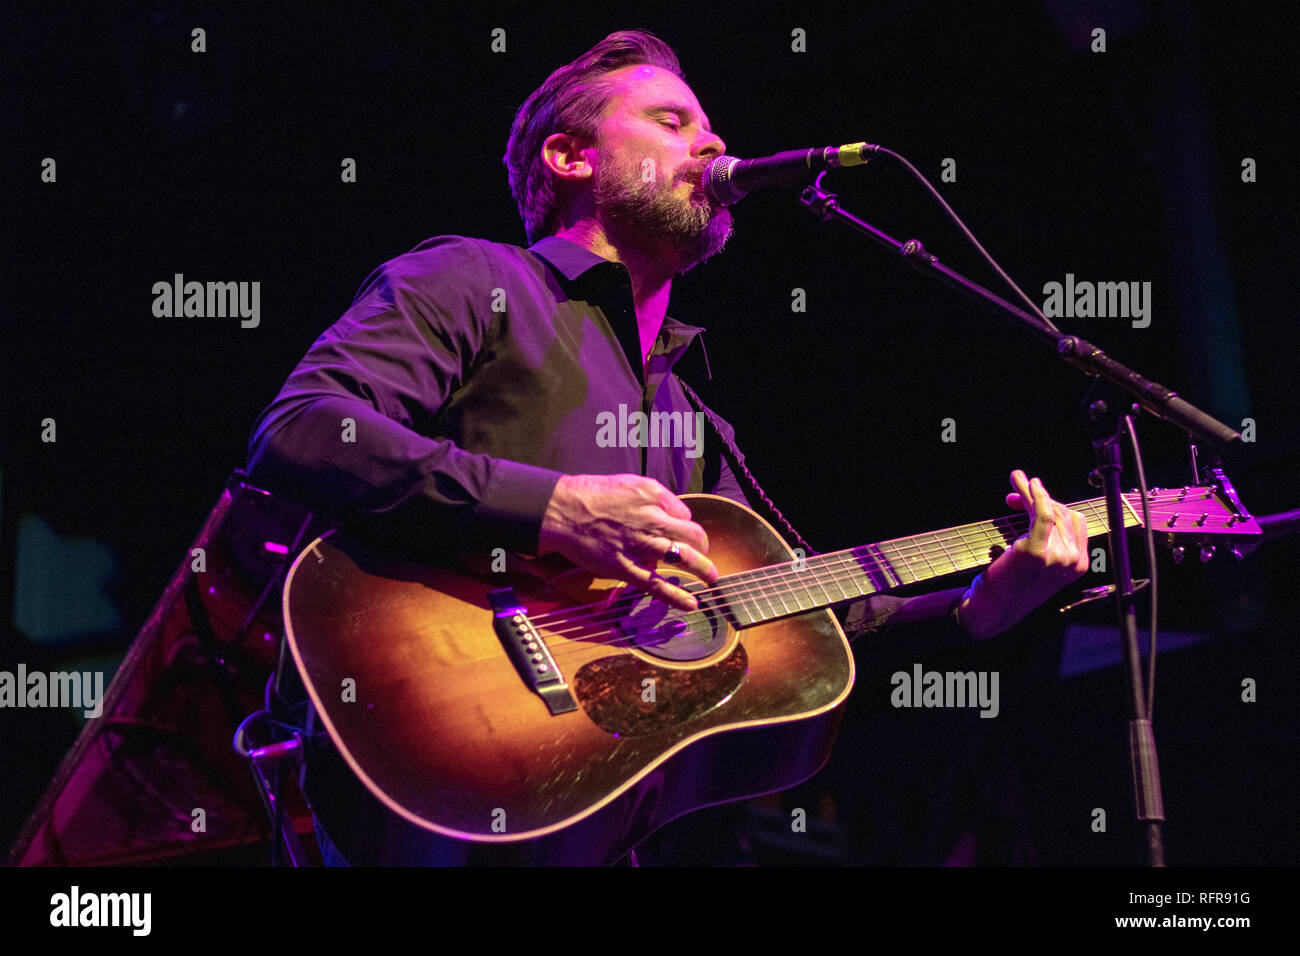 American country music singer, Charles Esten, performing at The Old ...